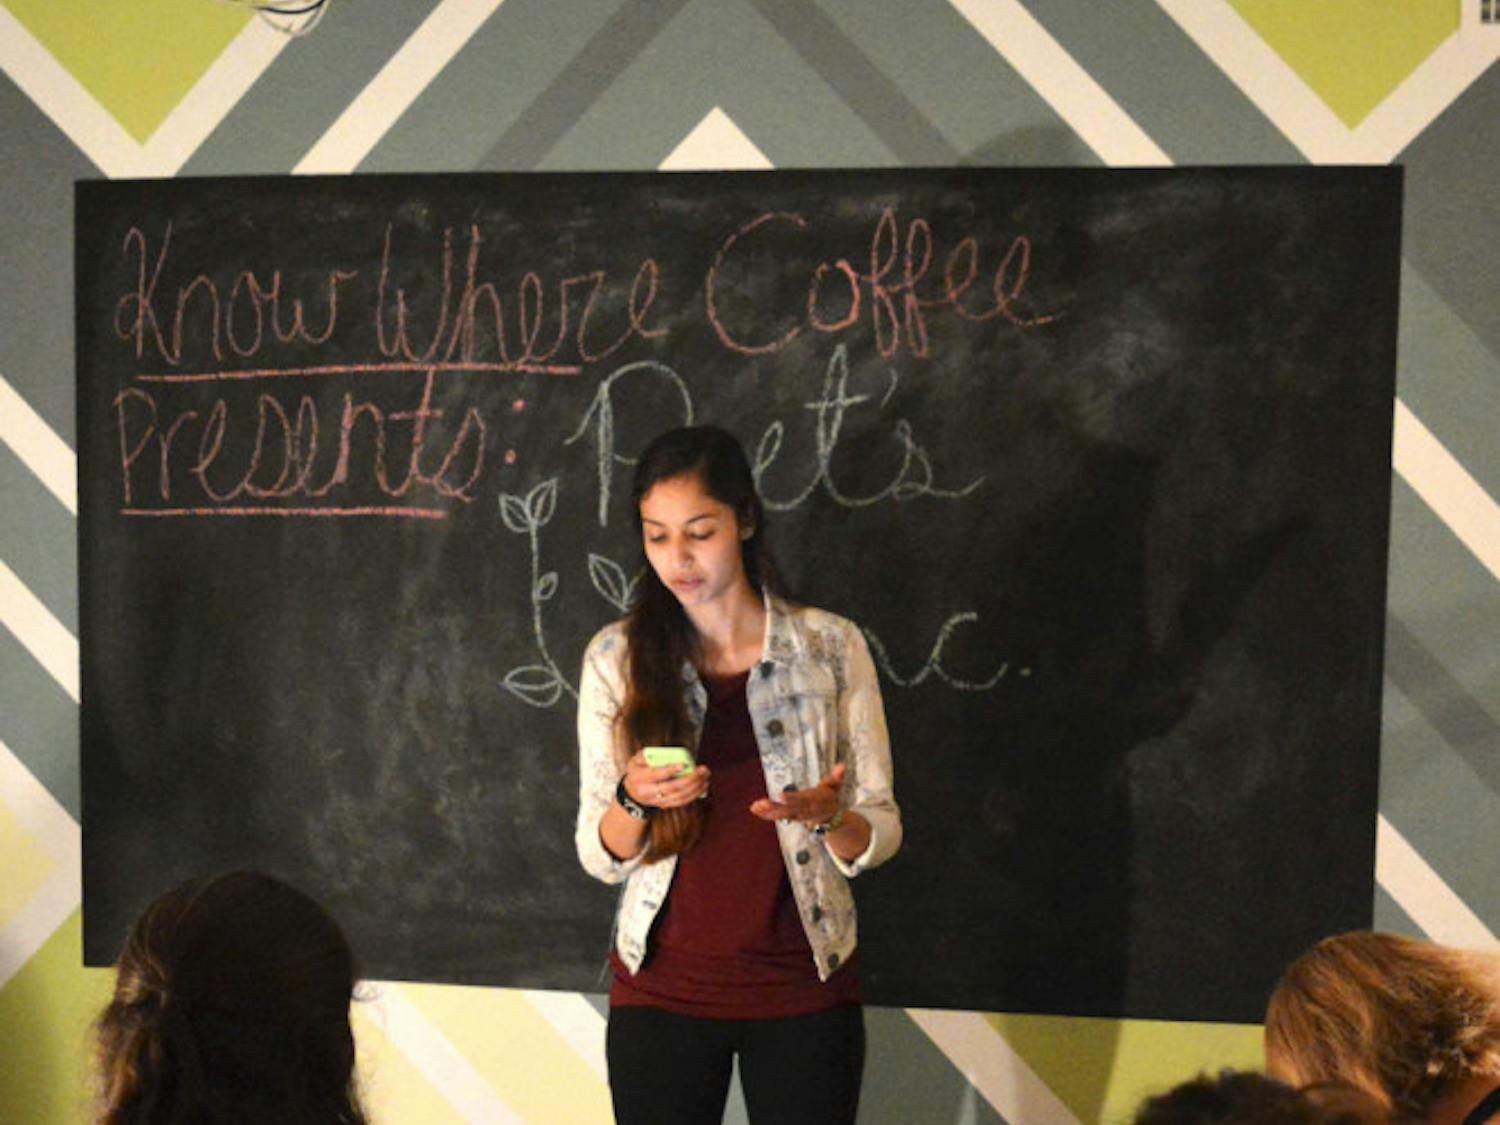 Kelsey Cruz, a 20-year-old UF psychology sophomore, shares a post-Valentine's Day poem with members of Poet's Inc at Know Where Coffee's open mic night Wednesday. The poem was a tribute to being single on Valentine’s Day.